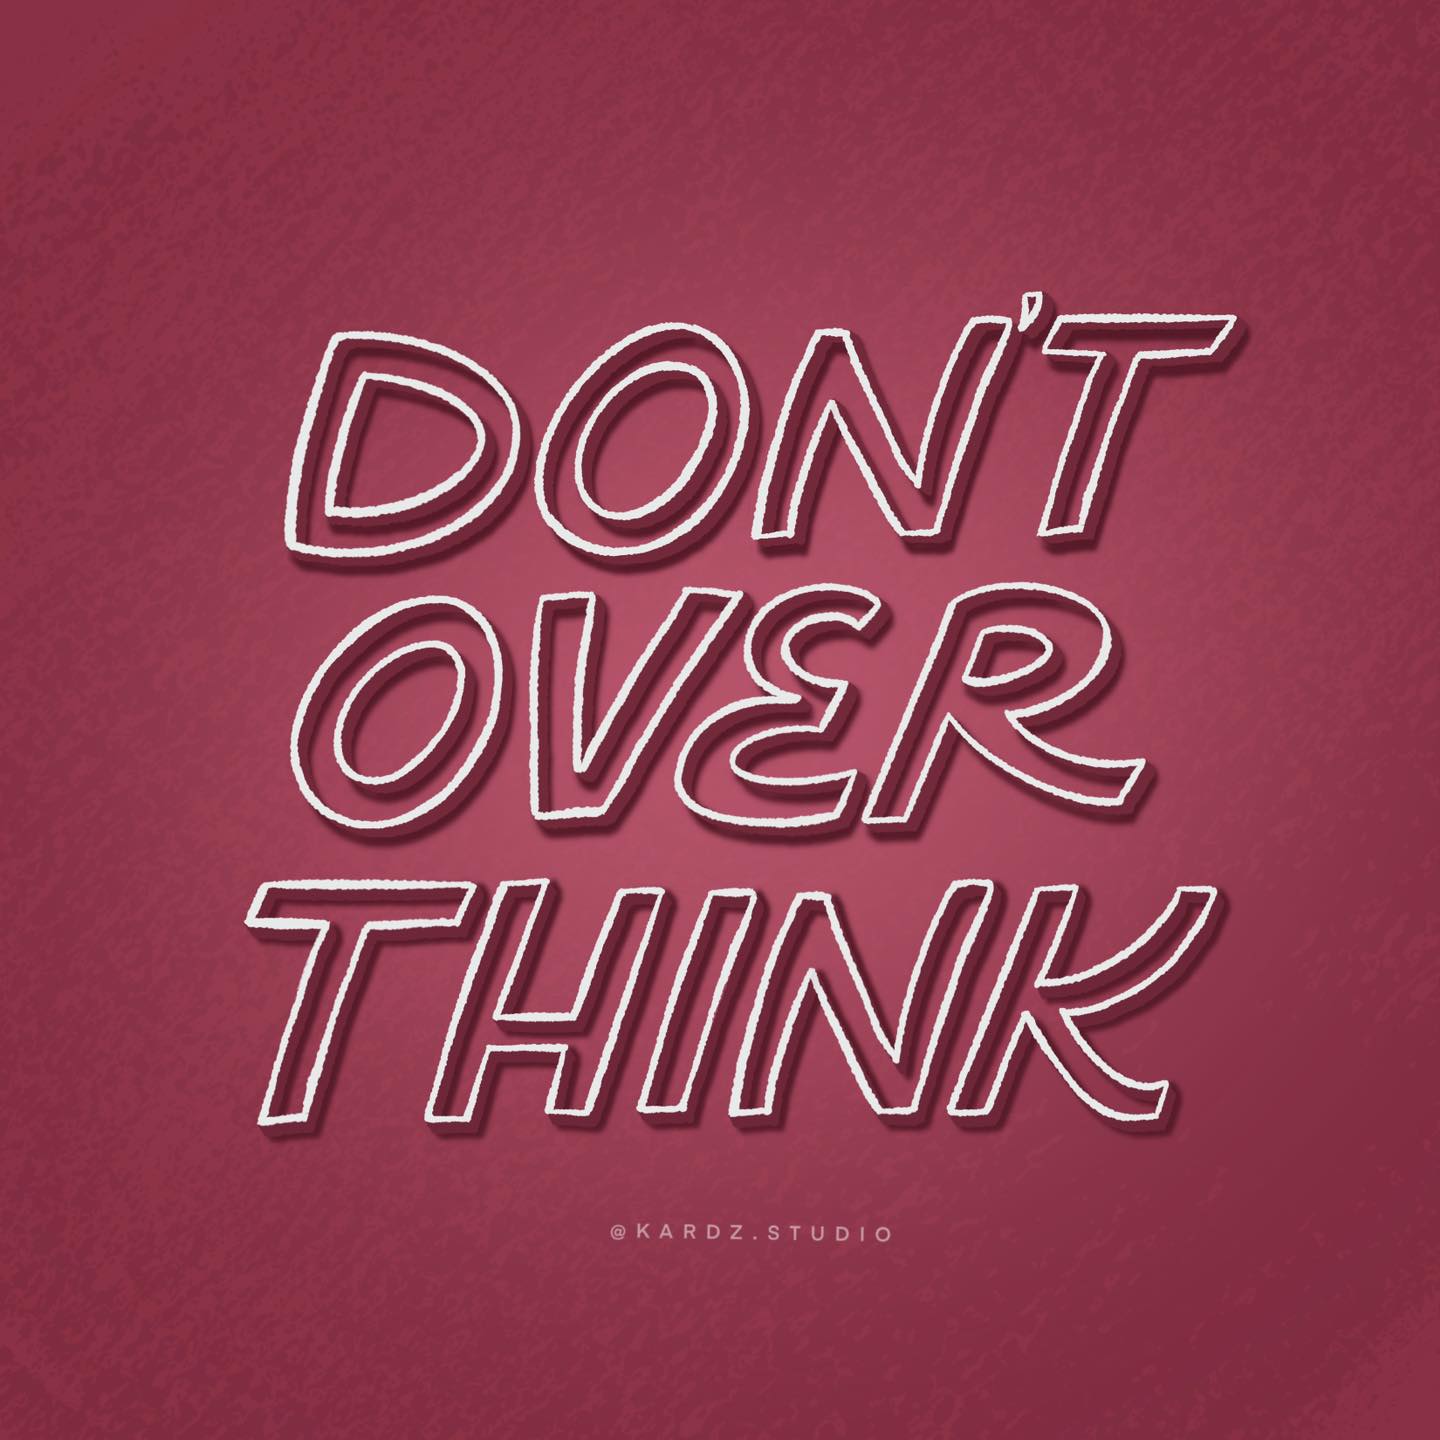 Outline style for day 22! #letteringstylechallenge2023 
By Aurelie Maron

Personal reminder to stop overthinking, it’s n